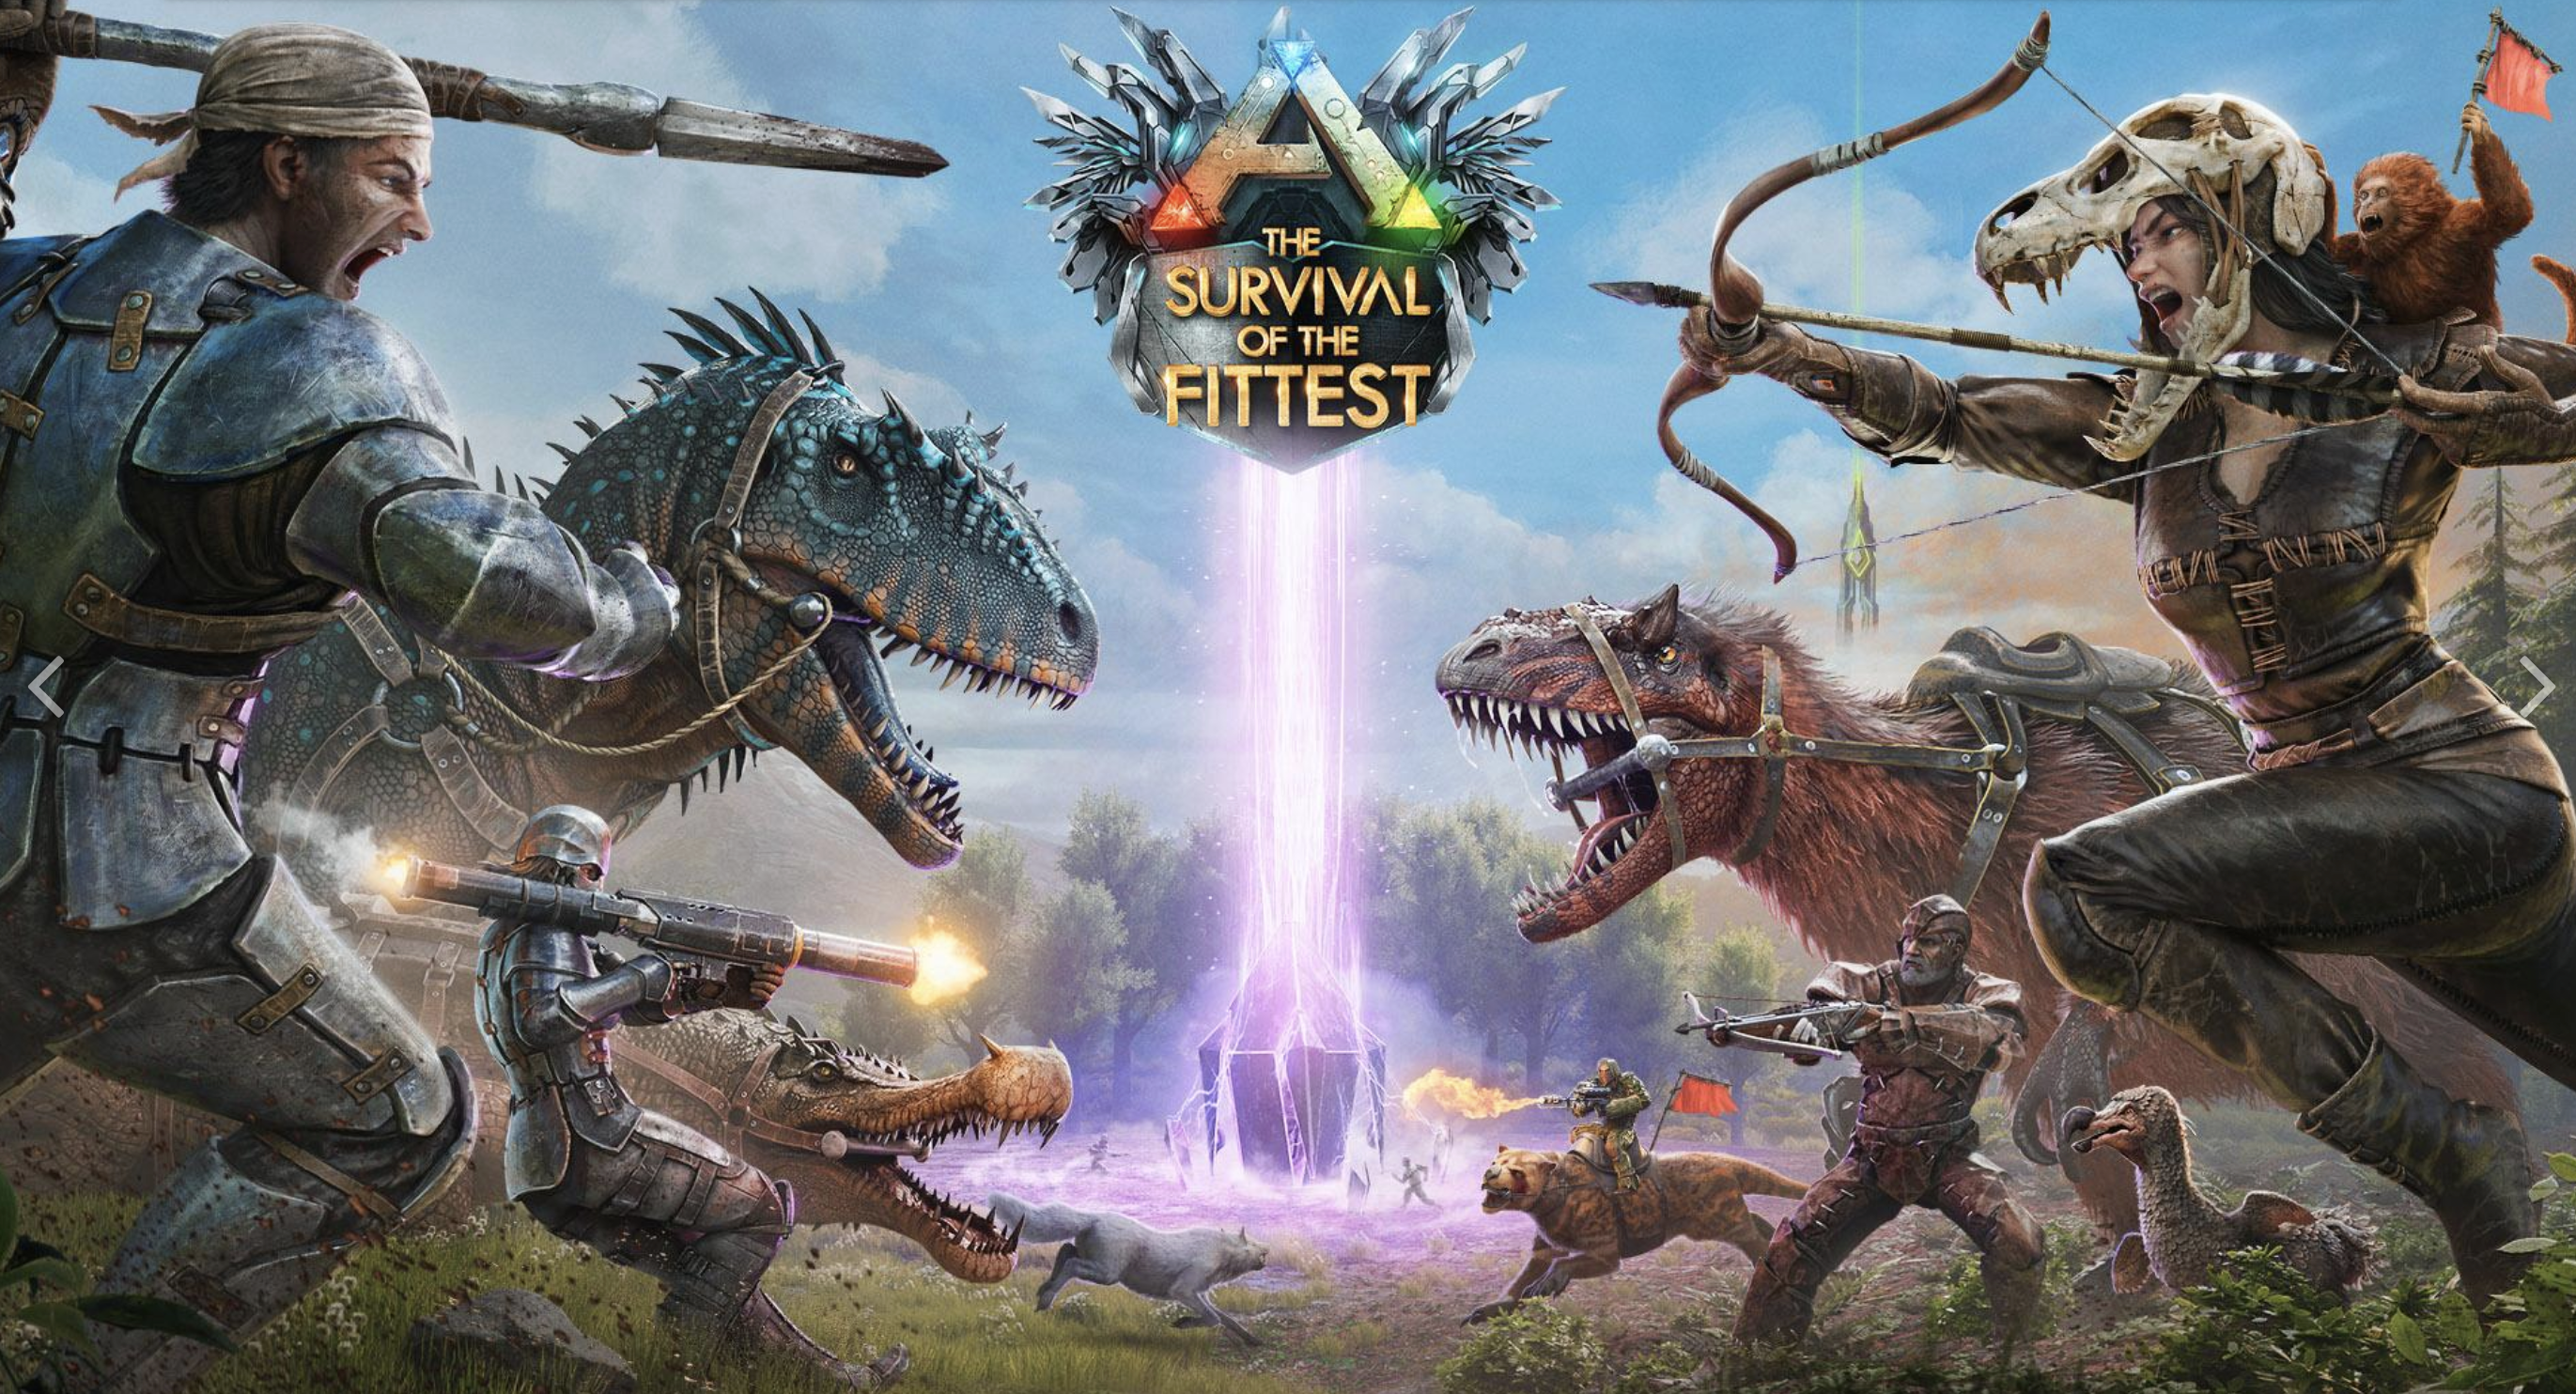 ARK: Survival Evolved - #1 Source for Tips, Tricks and Tutorials on PC,  Xbox / XOne and PS4